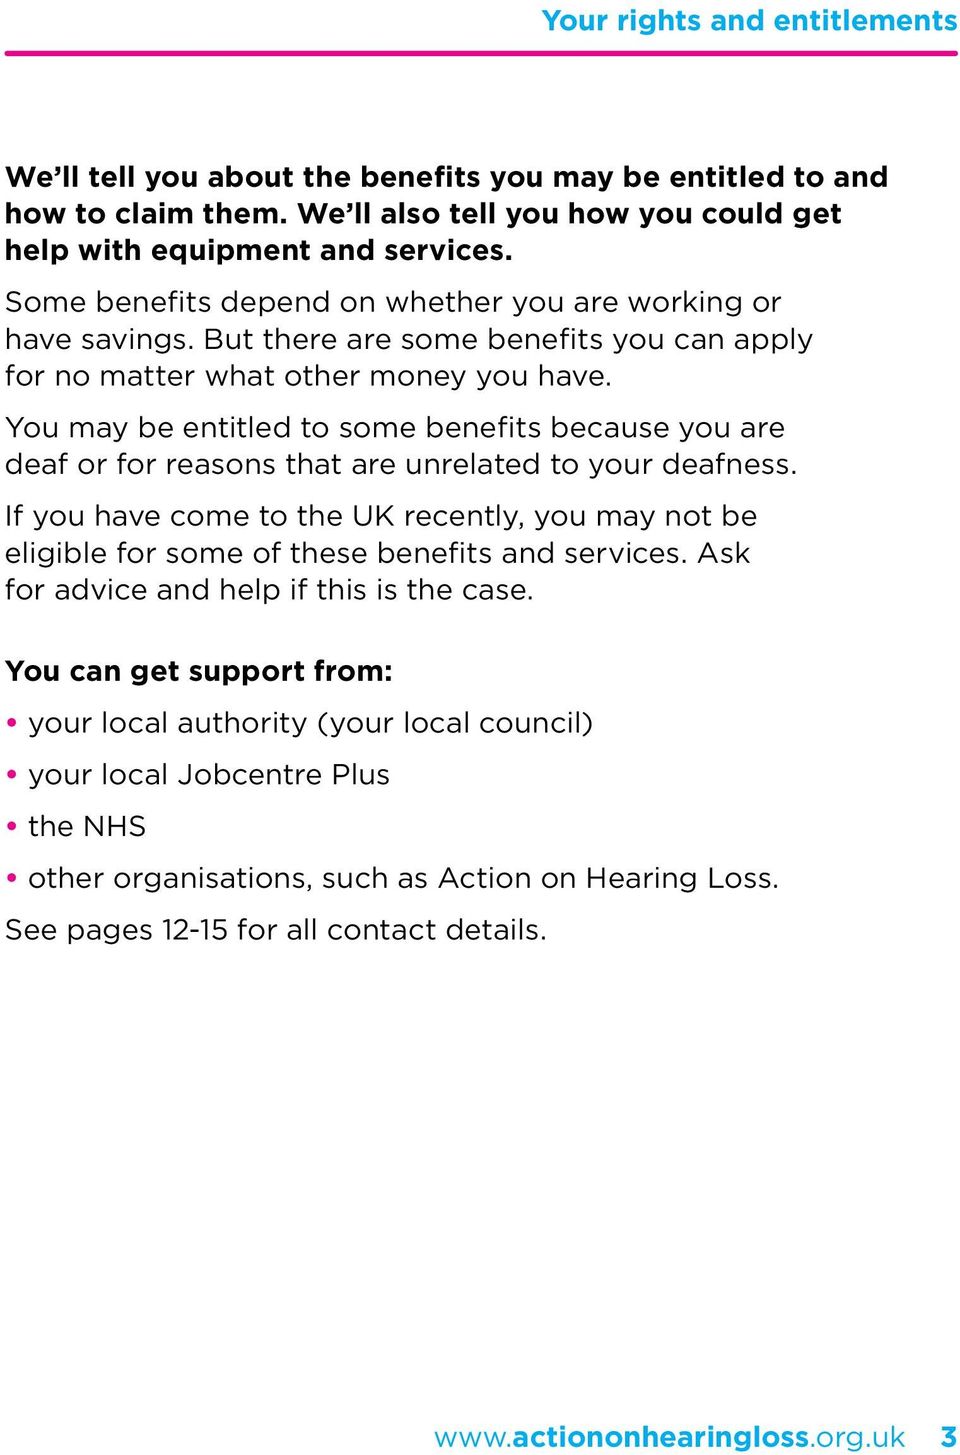 You may be entitled to some benefits because you are deaf or for reasons that are unrelated to your deafness.